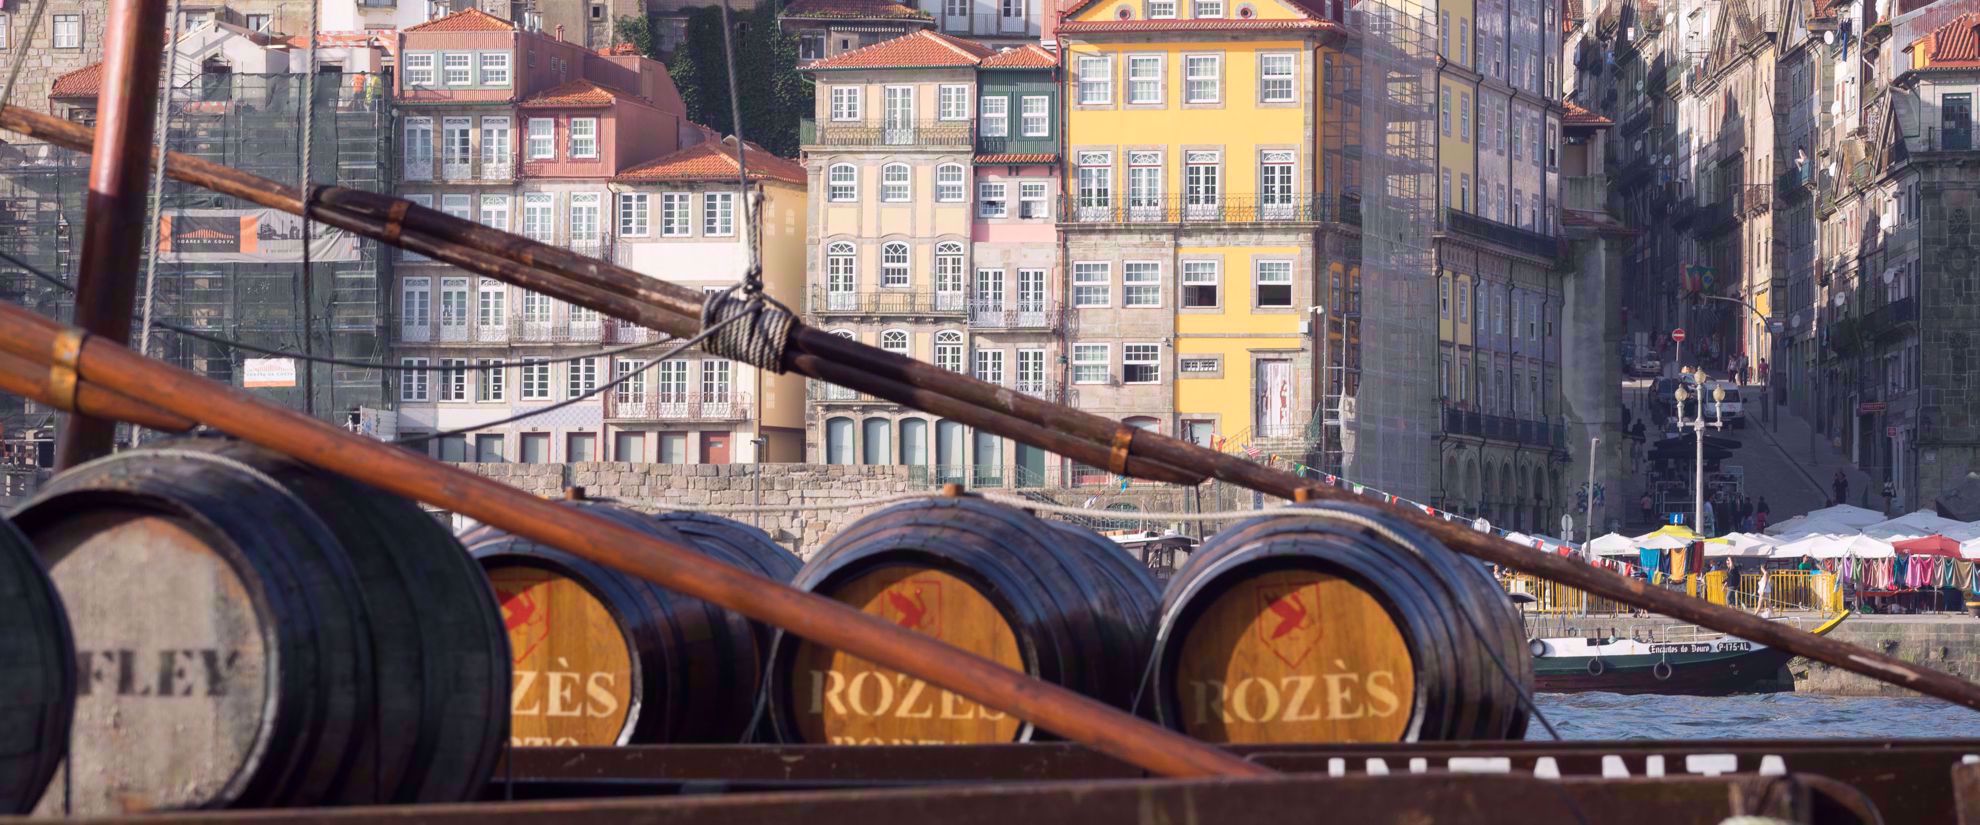 wine barrels on sailboat in douro valley